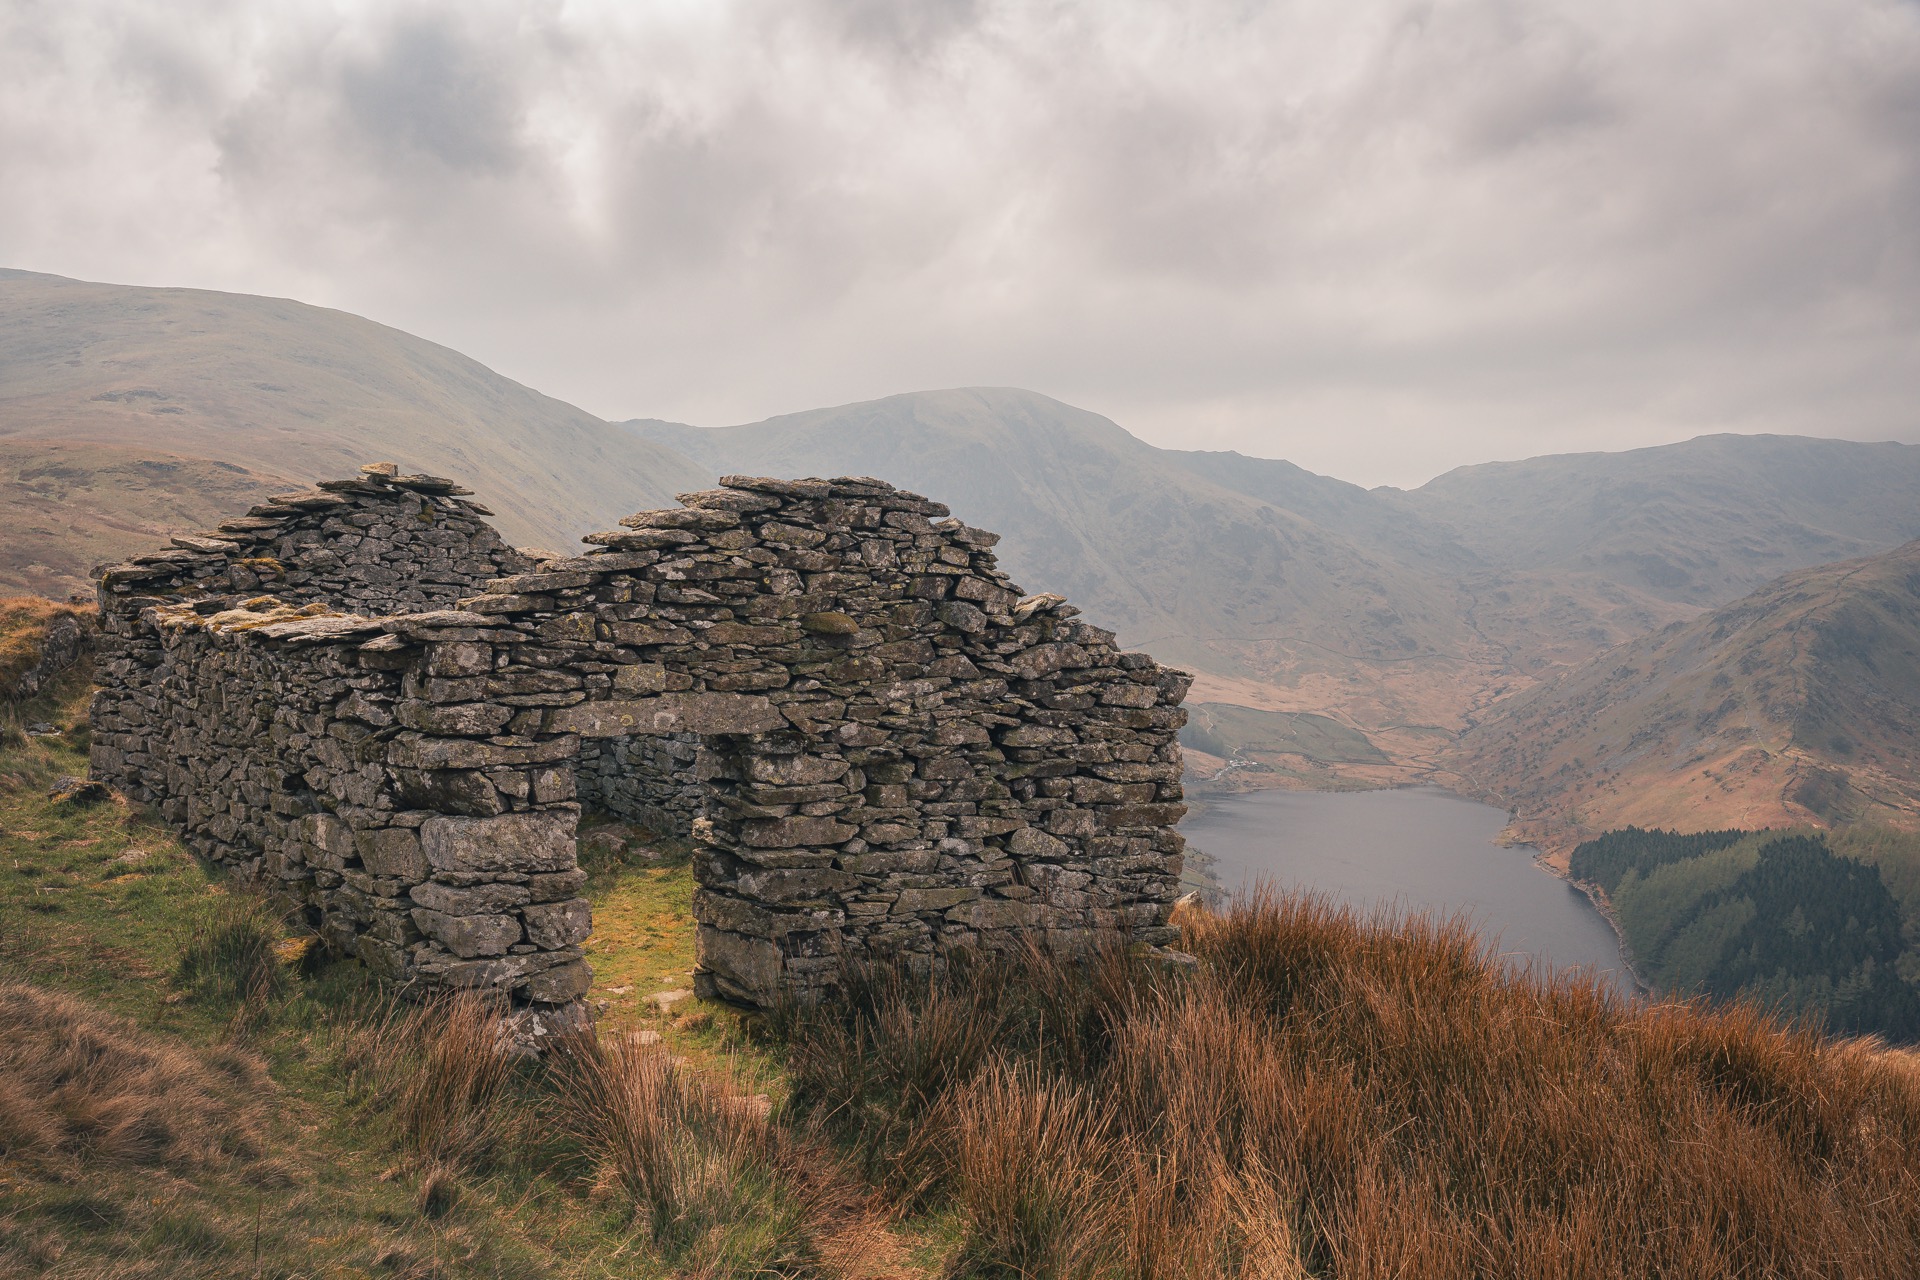 Dry stonewall building with a single door in the front. A missing roof but the front and back of the building clearly show the shape as it points up. Haweswater can be seen down below in the distance.